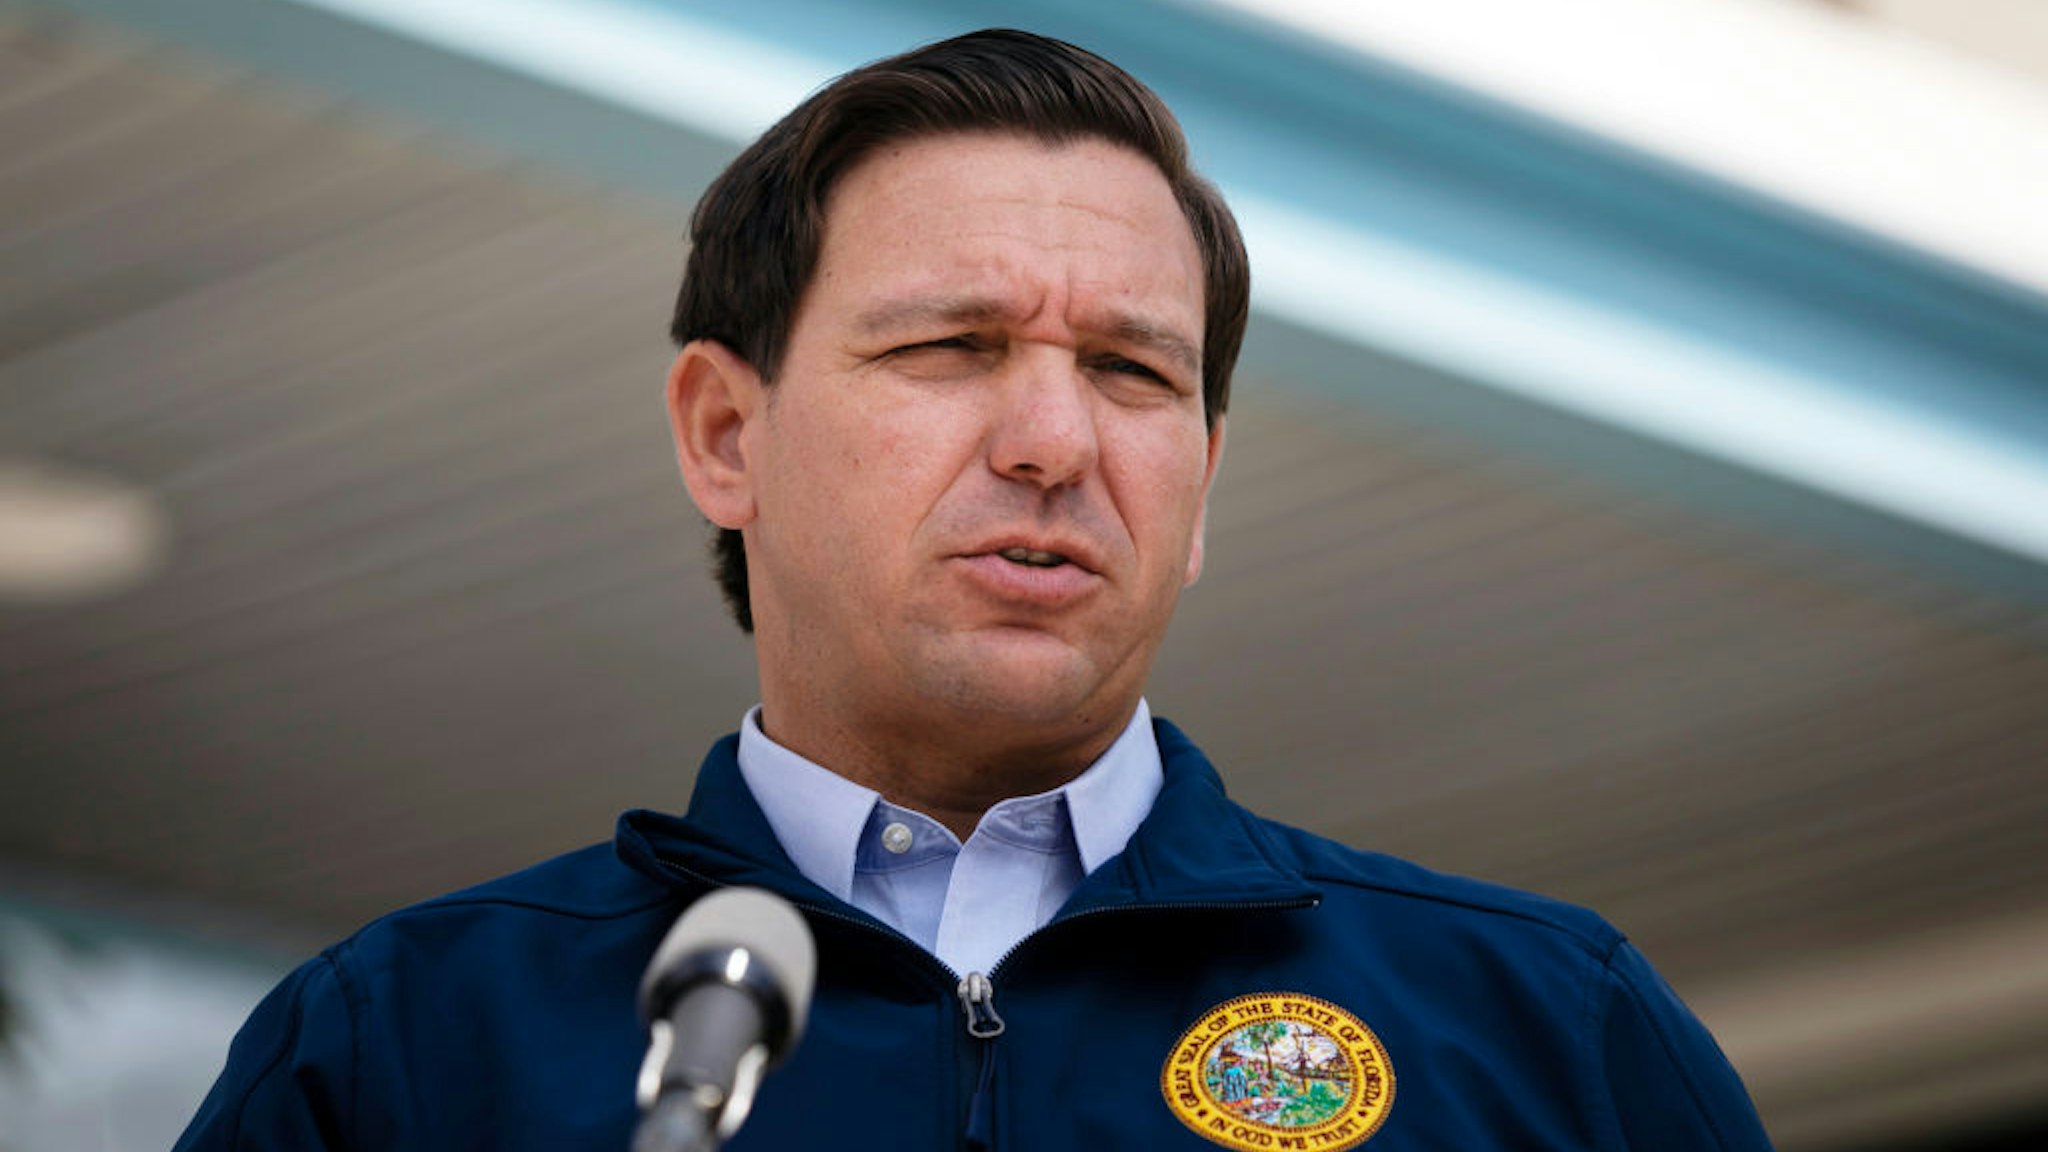 MIAMI, FL - AUGUST 29: Governor Ron DeSantis gives a briefing regarding Hurricane Dorian to the media at National Hurricane Center on August 29, 2019 in Miami, Florida. Hurricane Dorian is expected to become a Category 4 as it approaches Florida in the upcoming days. (Photo by Eva Marie Uzcategui/Getty Images)